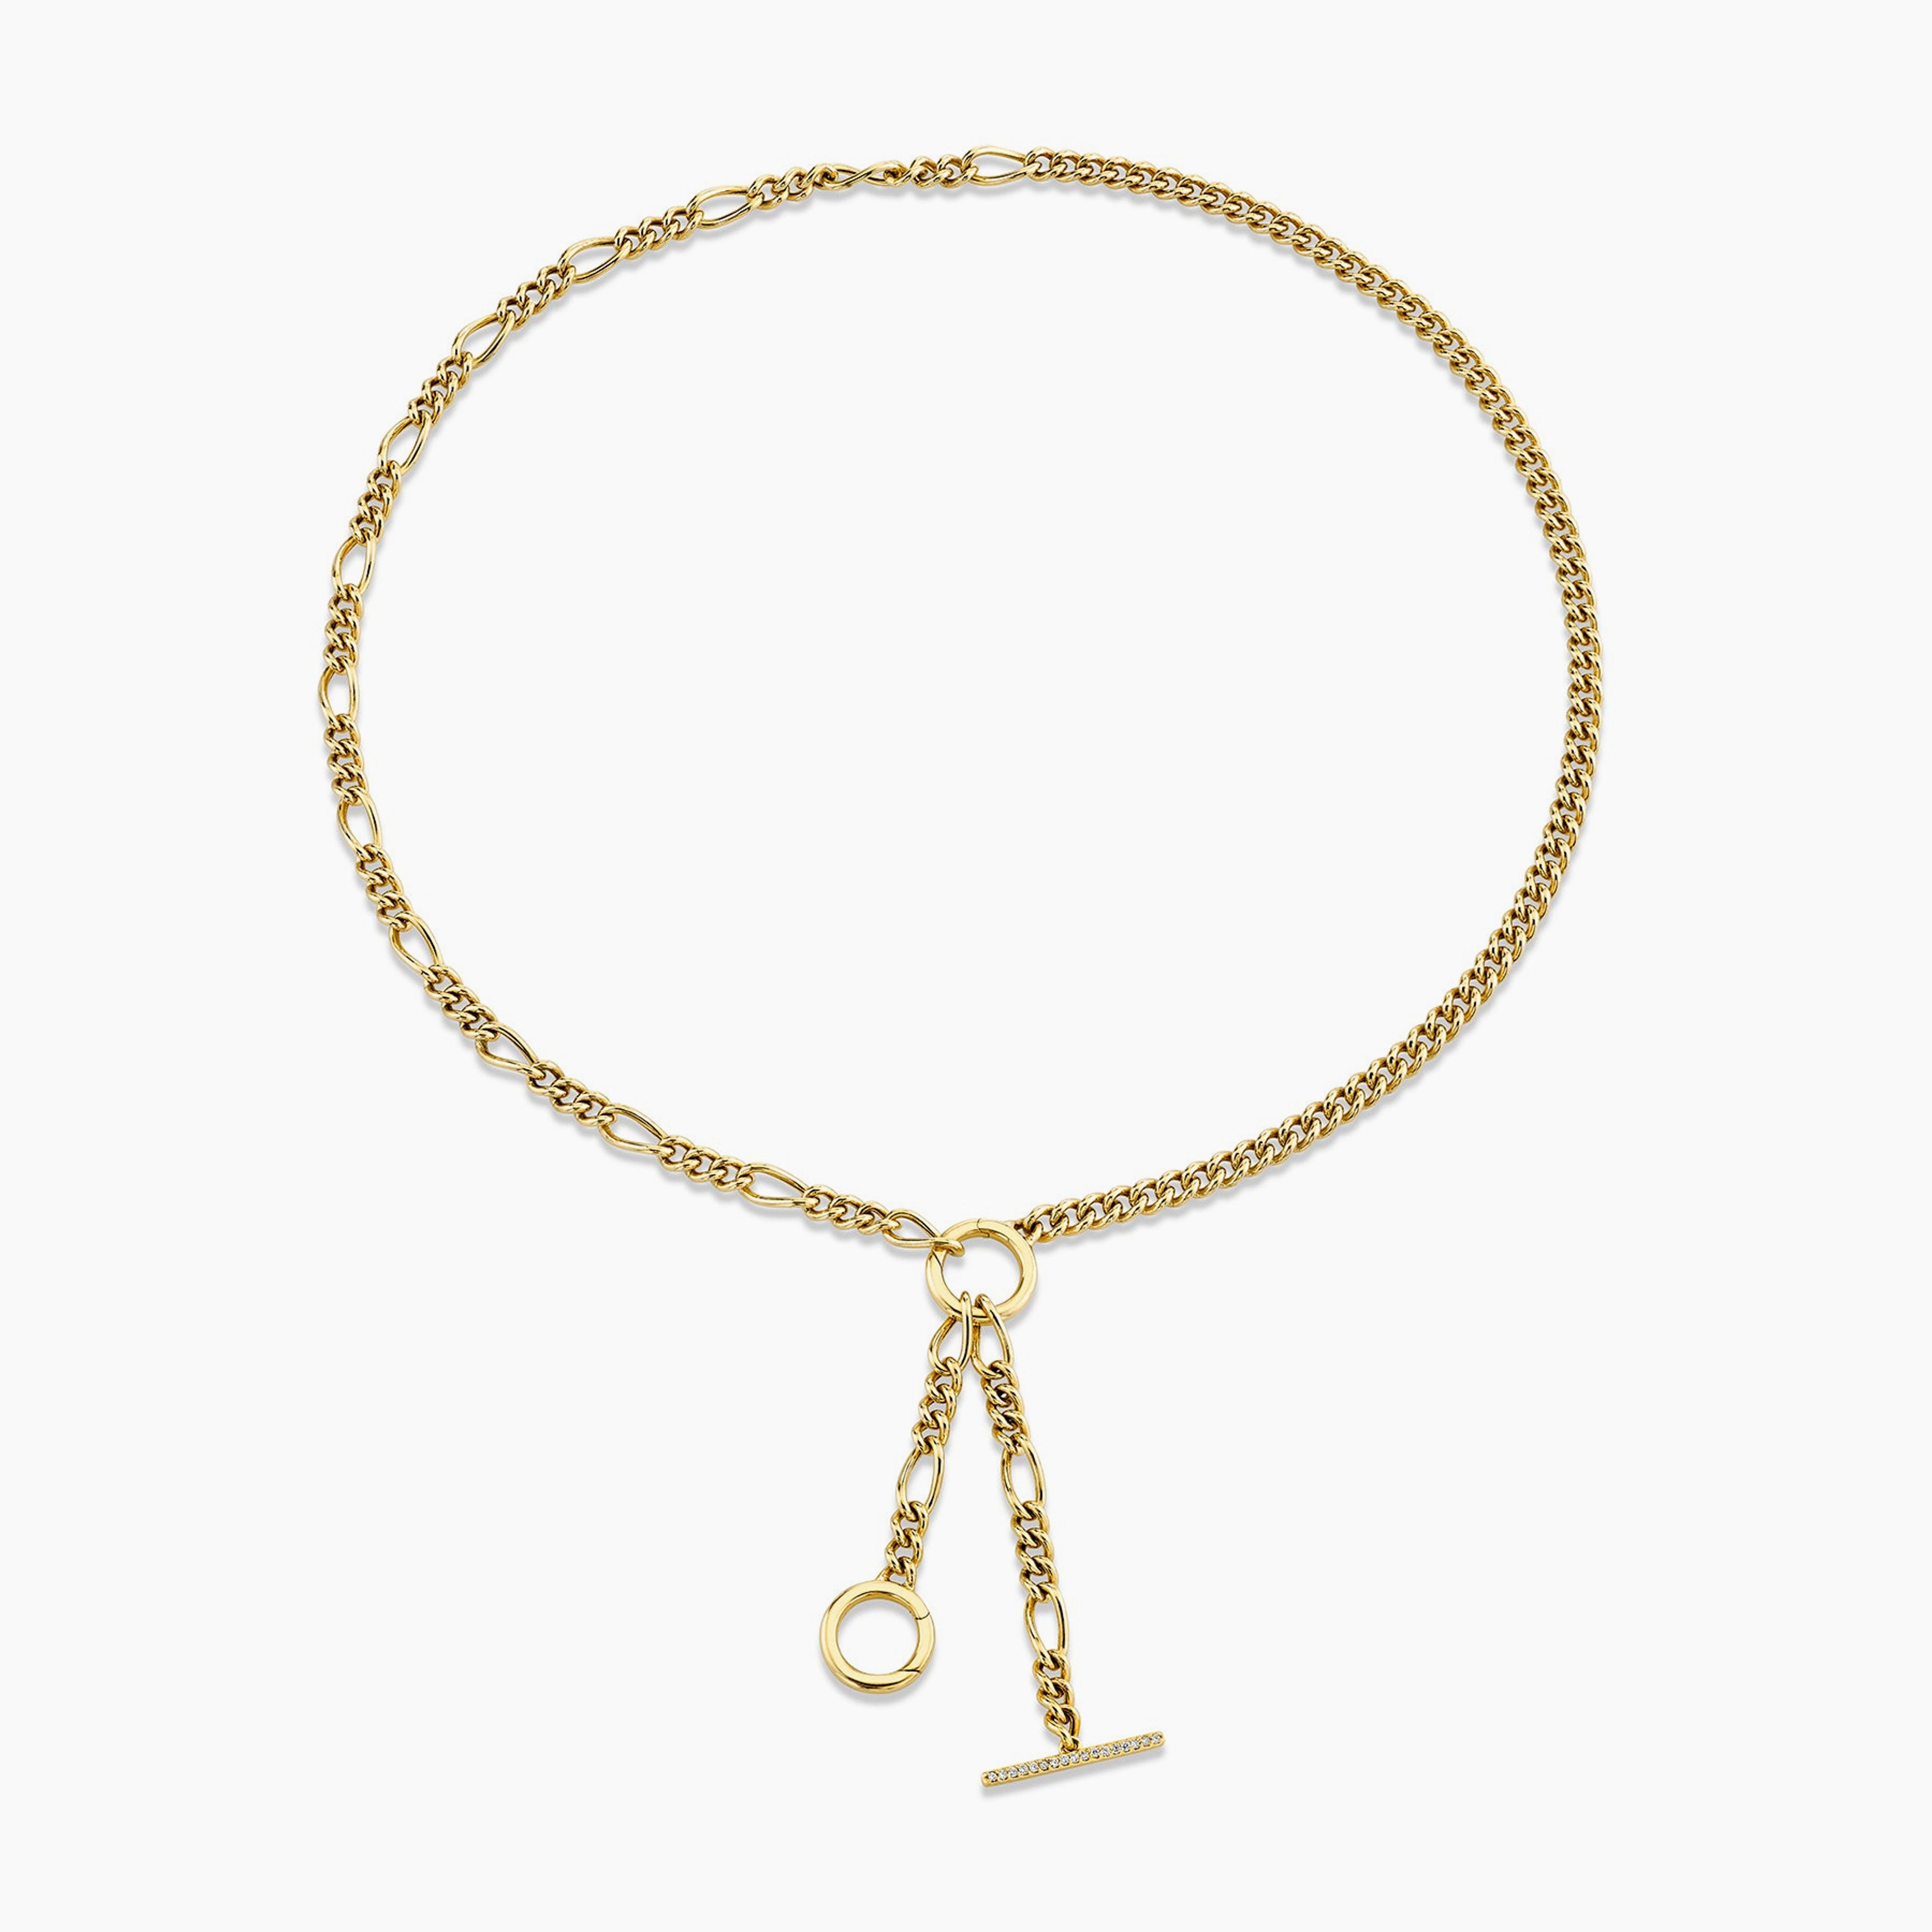 Toggle Chain Necklace with Charm Enhancers - White Diamond / 14k Yellow Gold